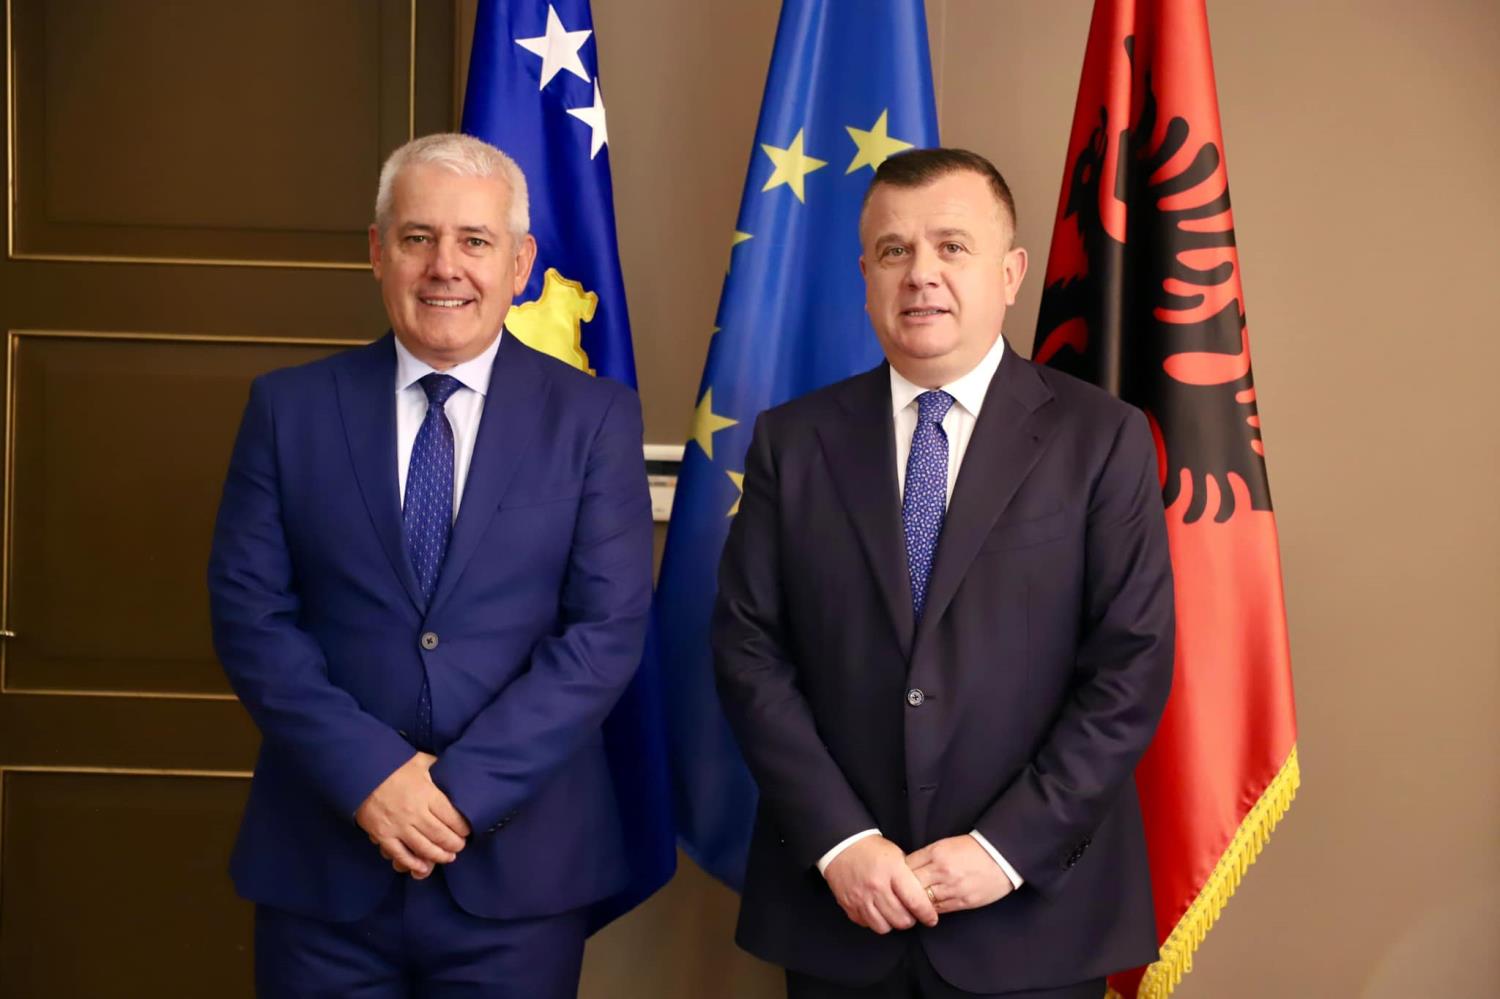 Minister of Internal Affairs, Mr. Xhelal Sveçla, meets with his counterpart from Albania, Mr. Taulant Balla